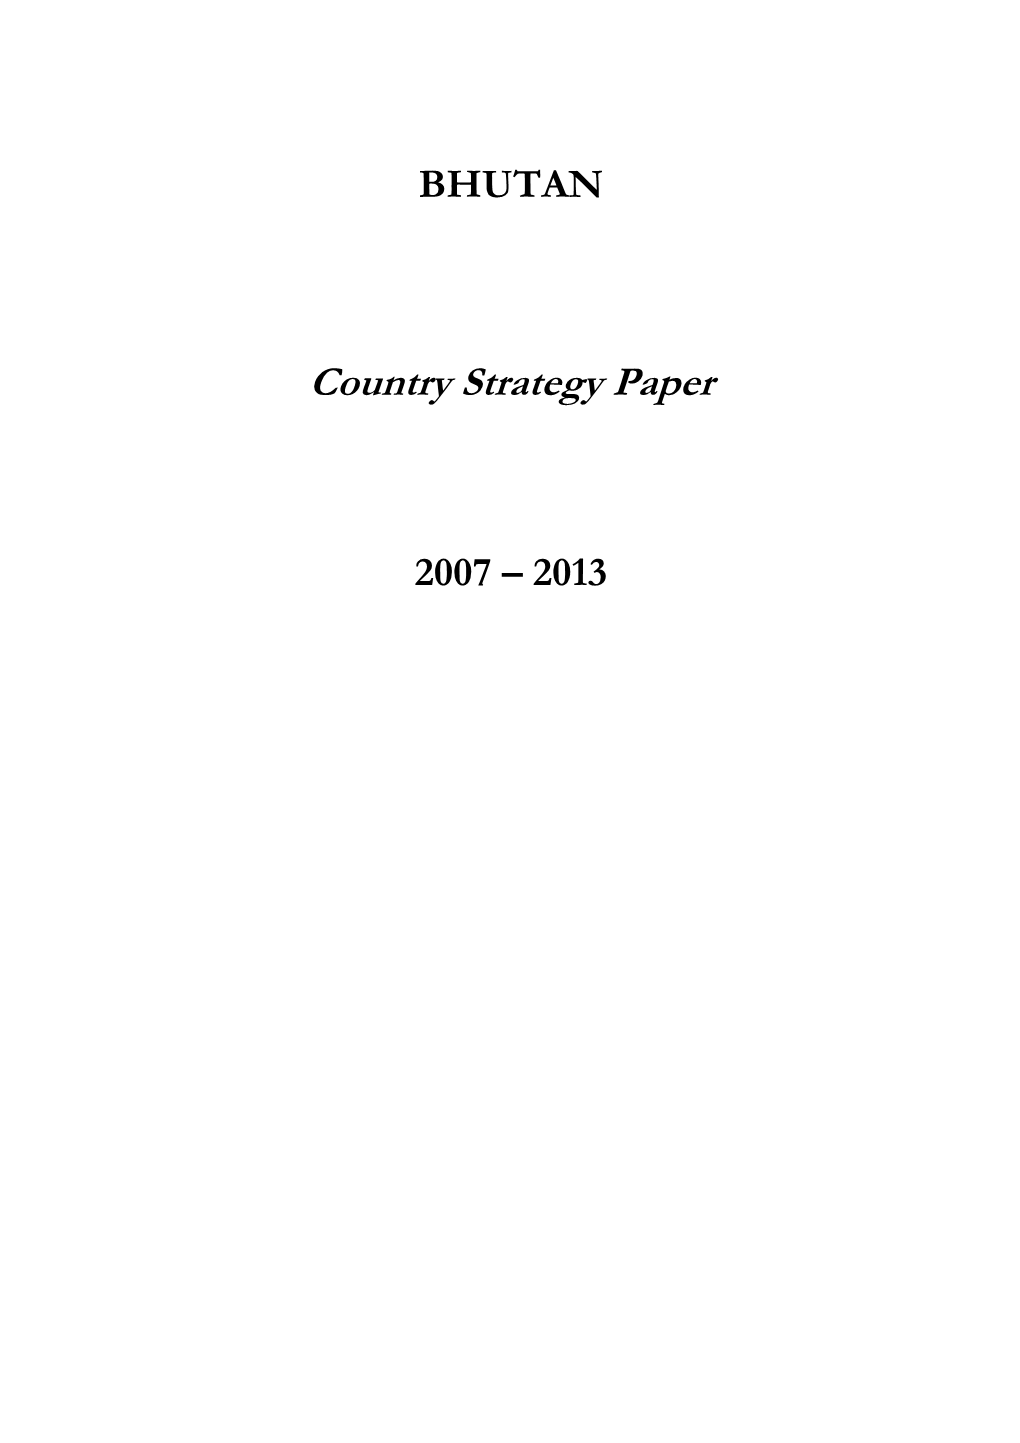 Bhutan Country Strategy Paper 2007-2013